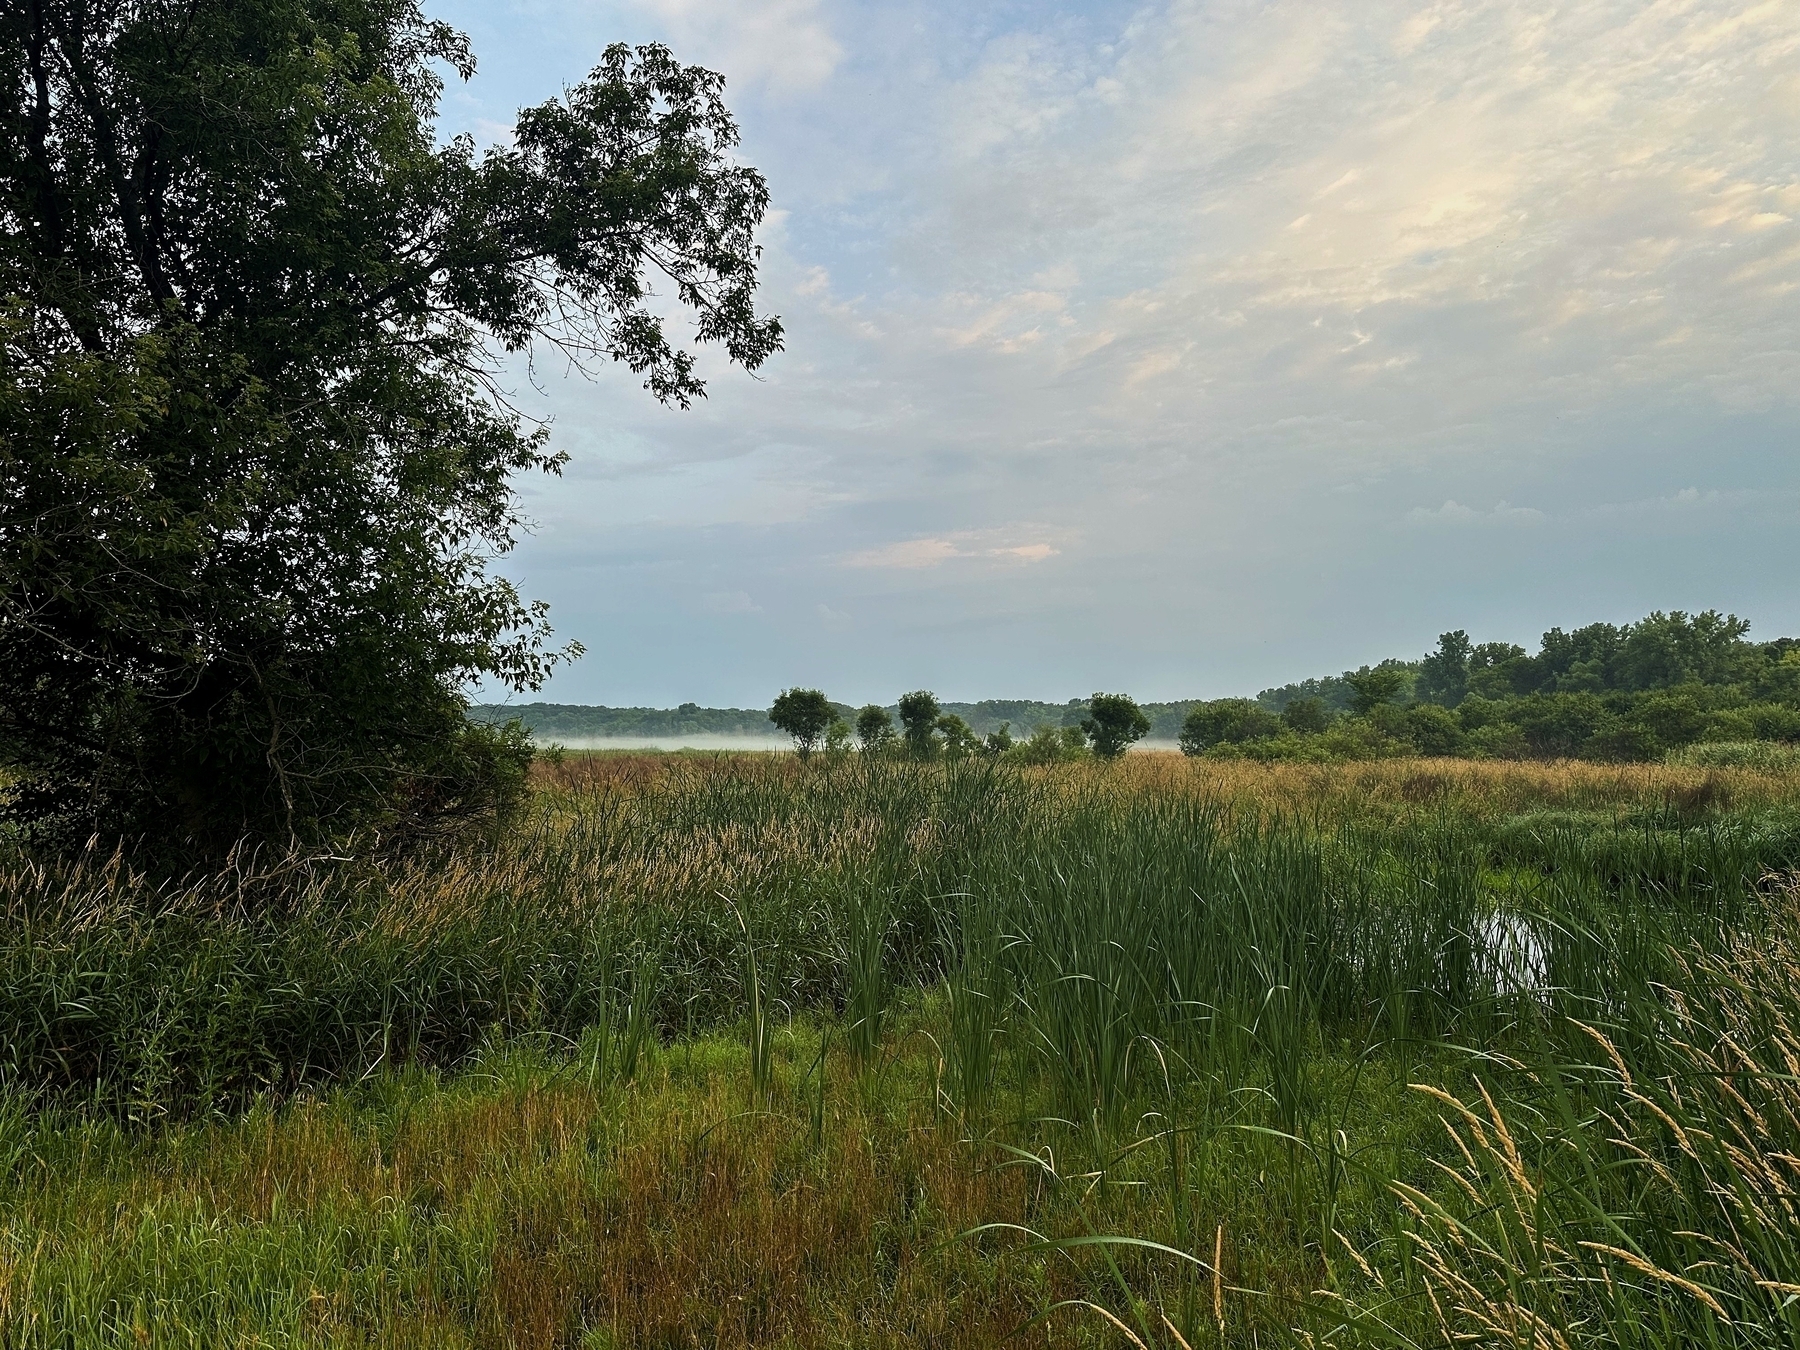 A tree stands prominently in a lush, wetland area with tall grasses and scattered bushes, under a partly cloudy sky at dawn.